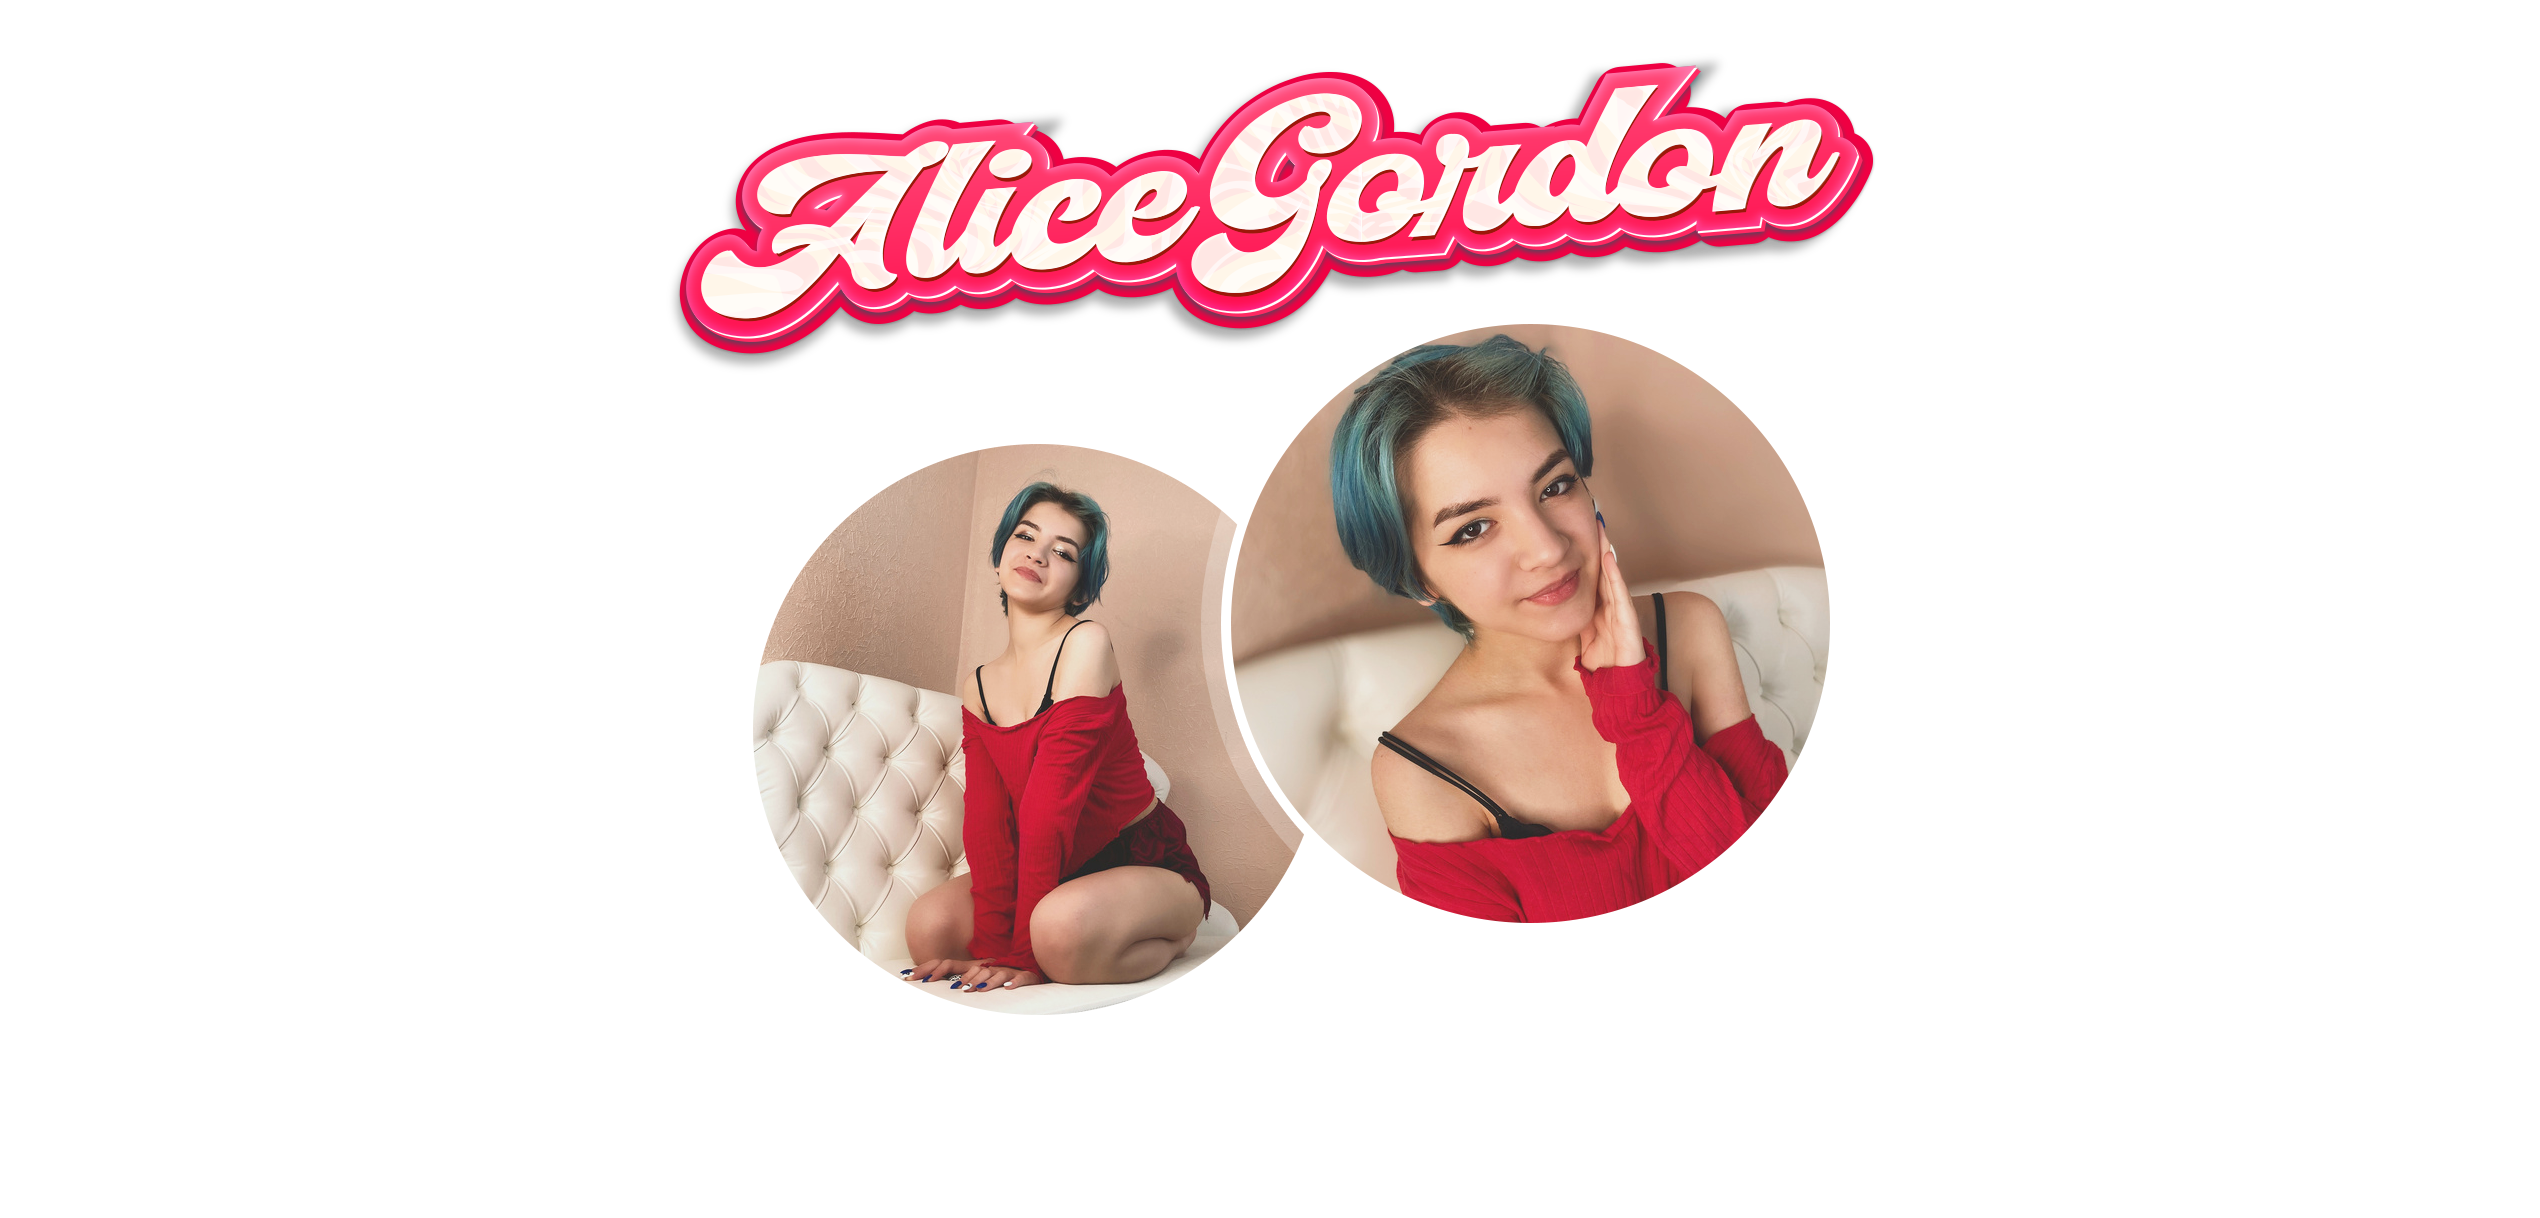 AliceGordon Hey honey, let's have some fun. It's always fun and interesting in my room! image: 1